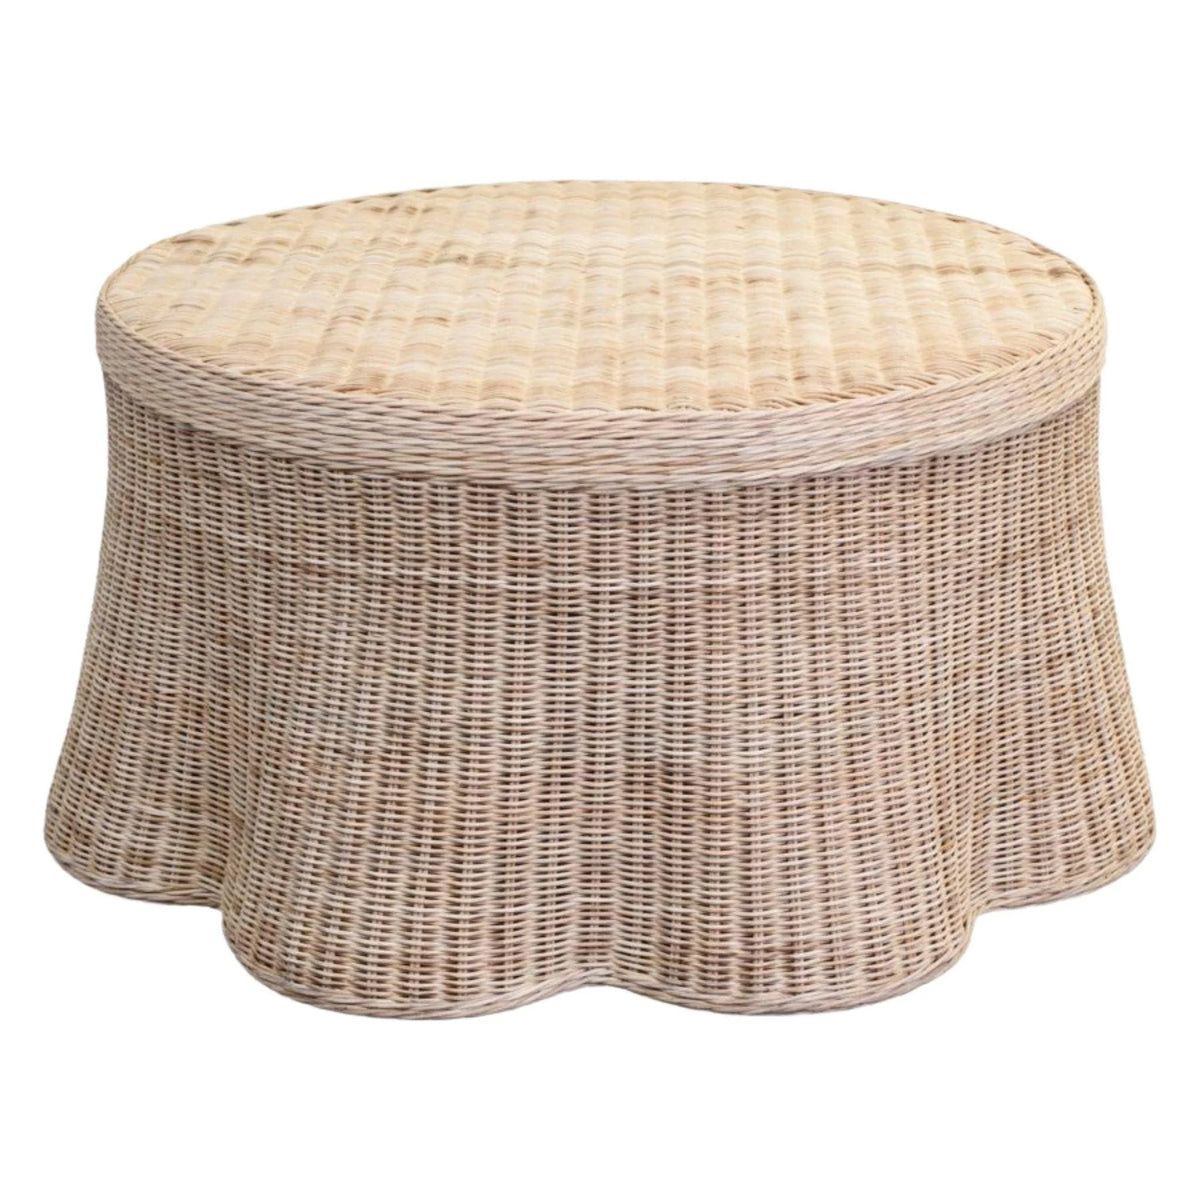 Scalloped Round Wicker Coffee Table | The Well Appointed House, LLC